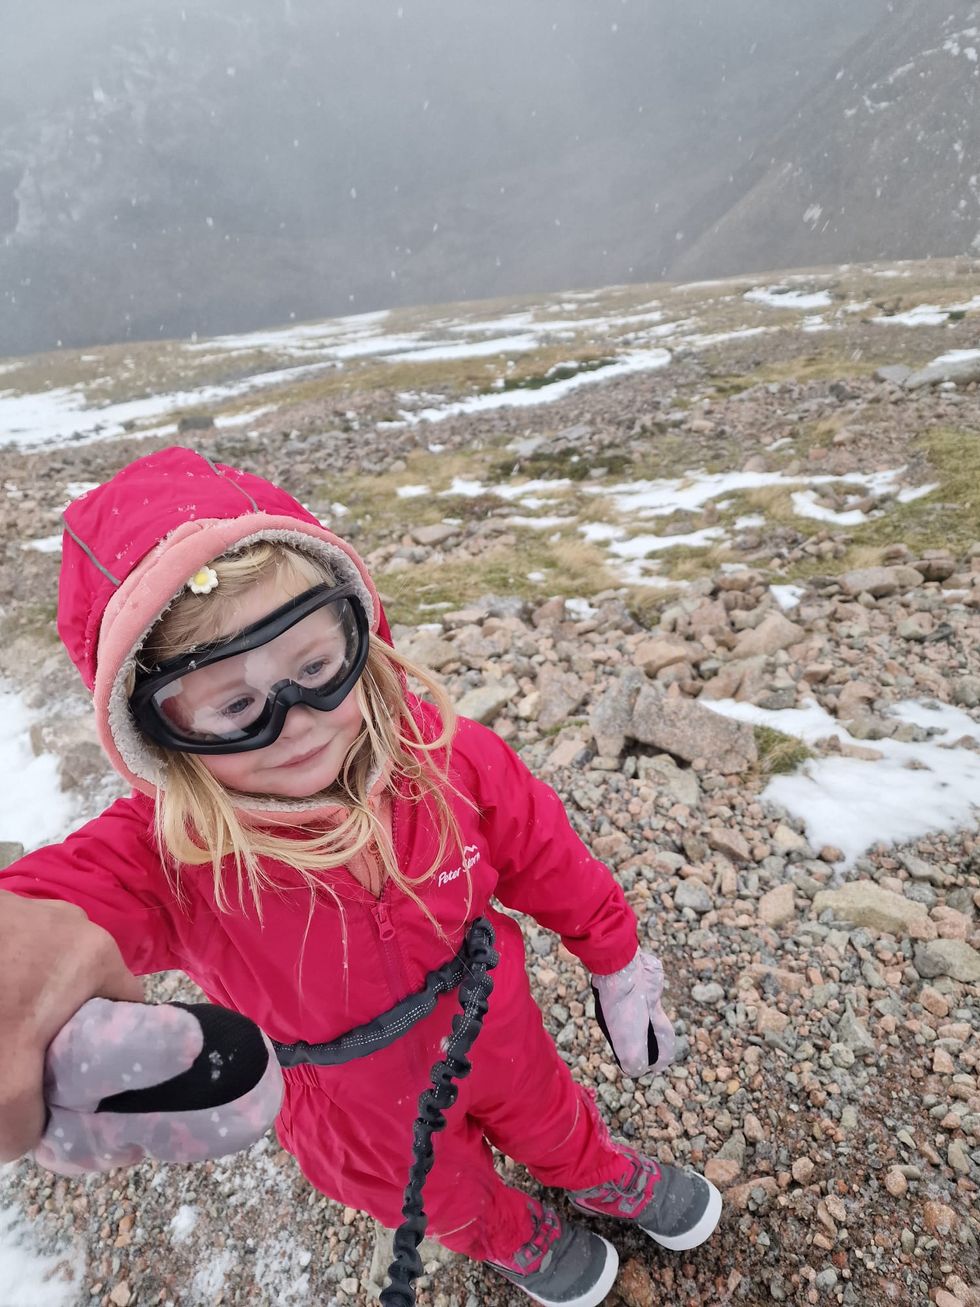 Youngest climber of UK’s highest peaks over 48 hours becomes award finalist